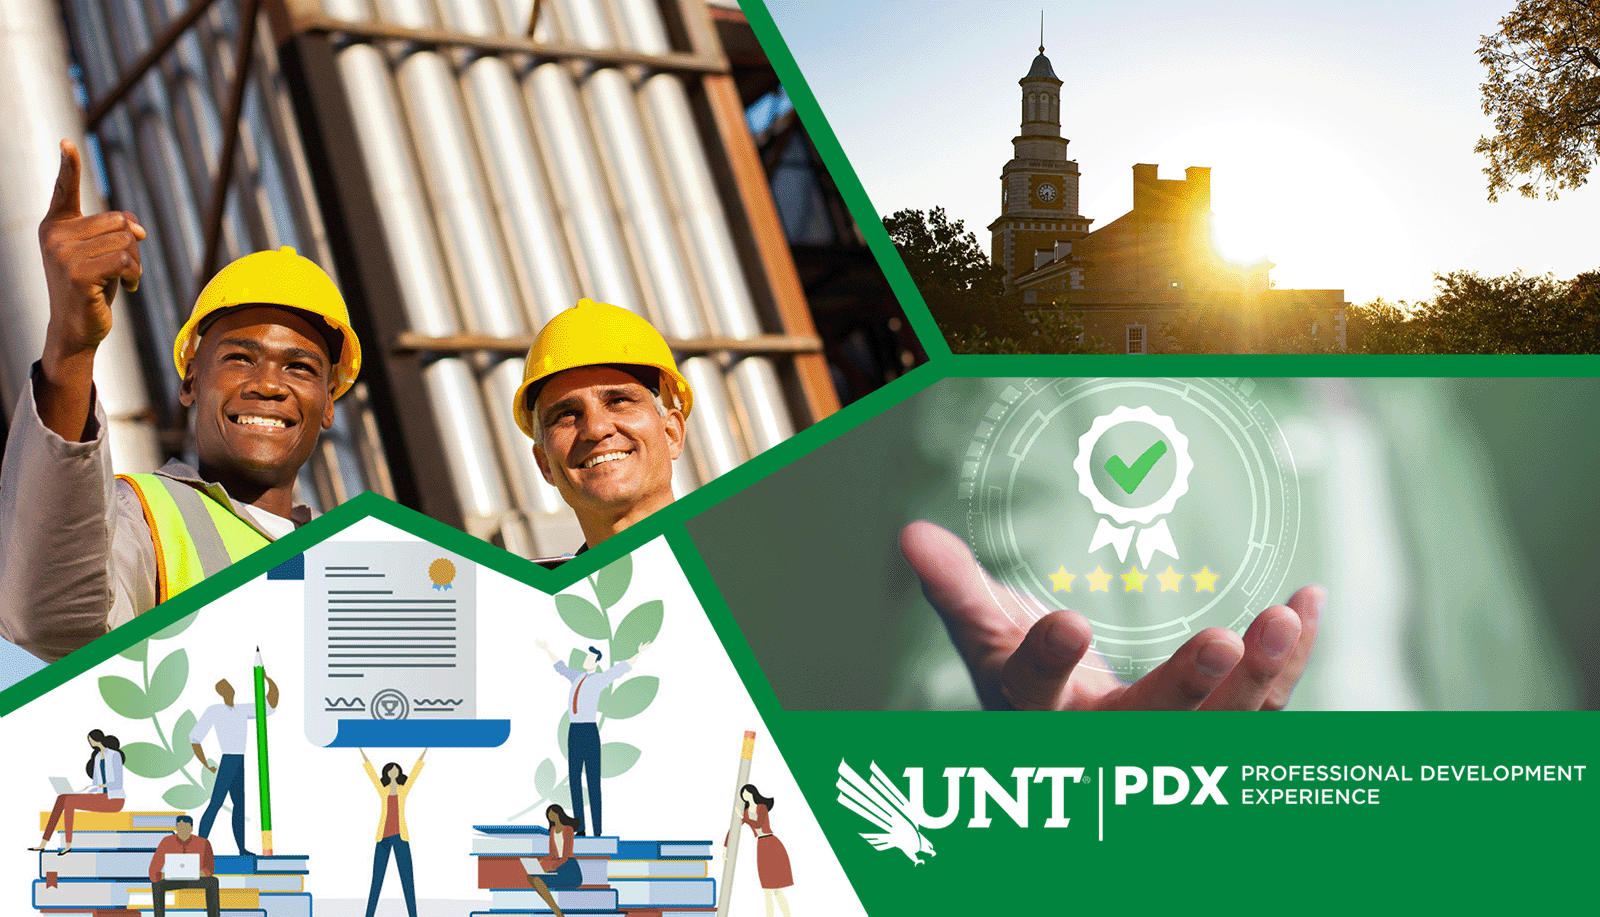 The UNT PDX logo with two people in hard-hats, an icon of a certificate completion, and the UNT Hurley Administration clock tower